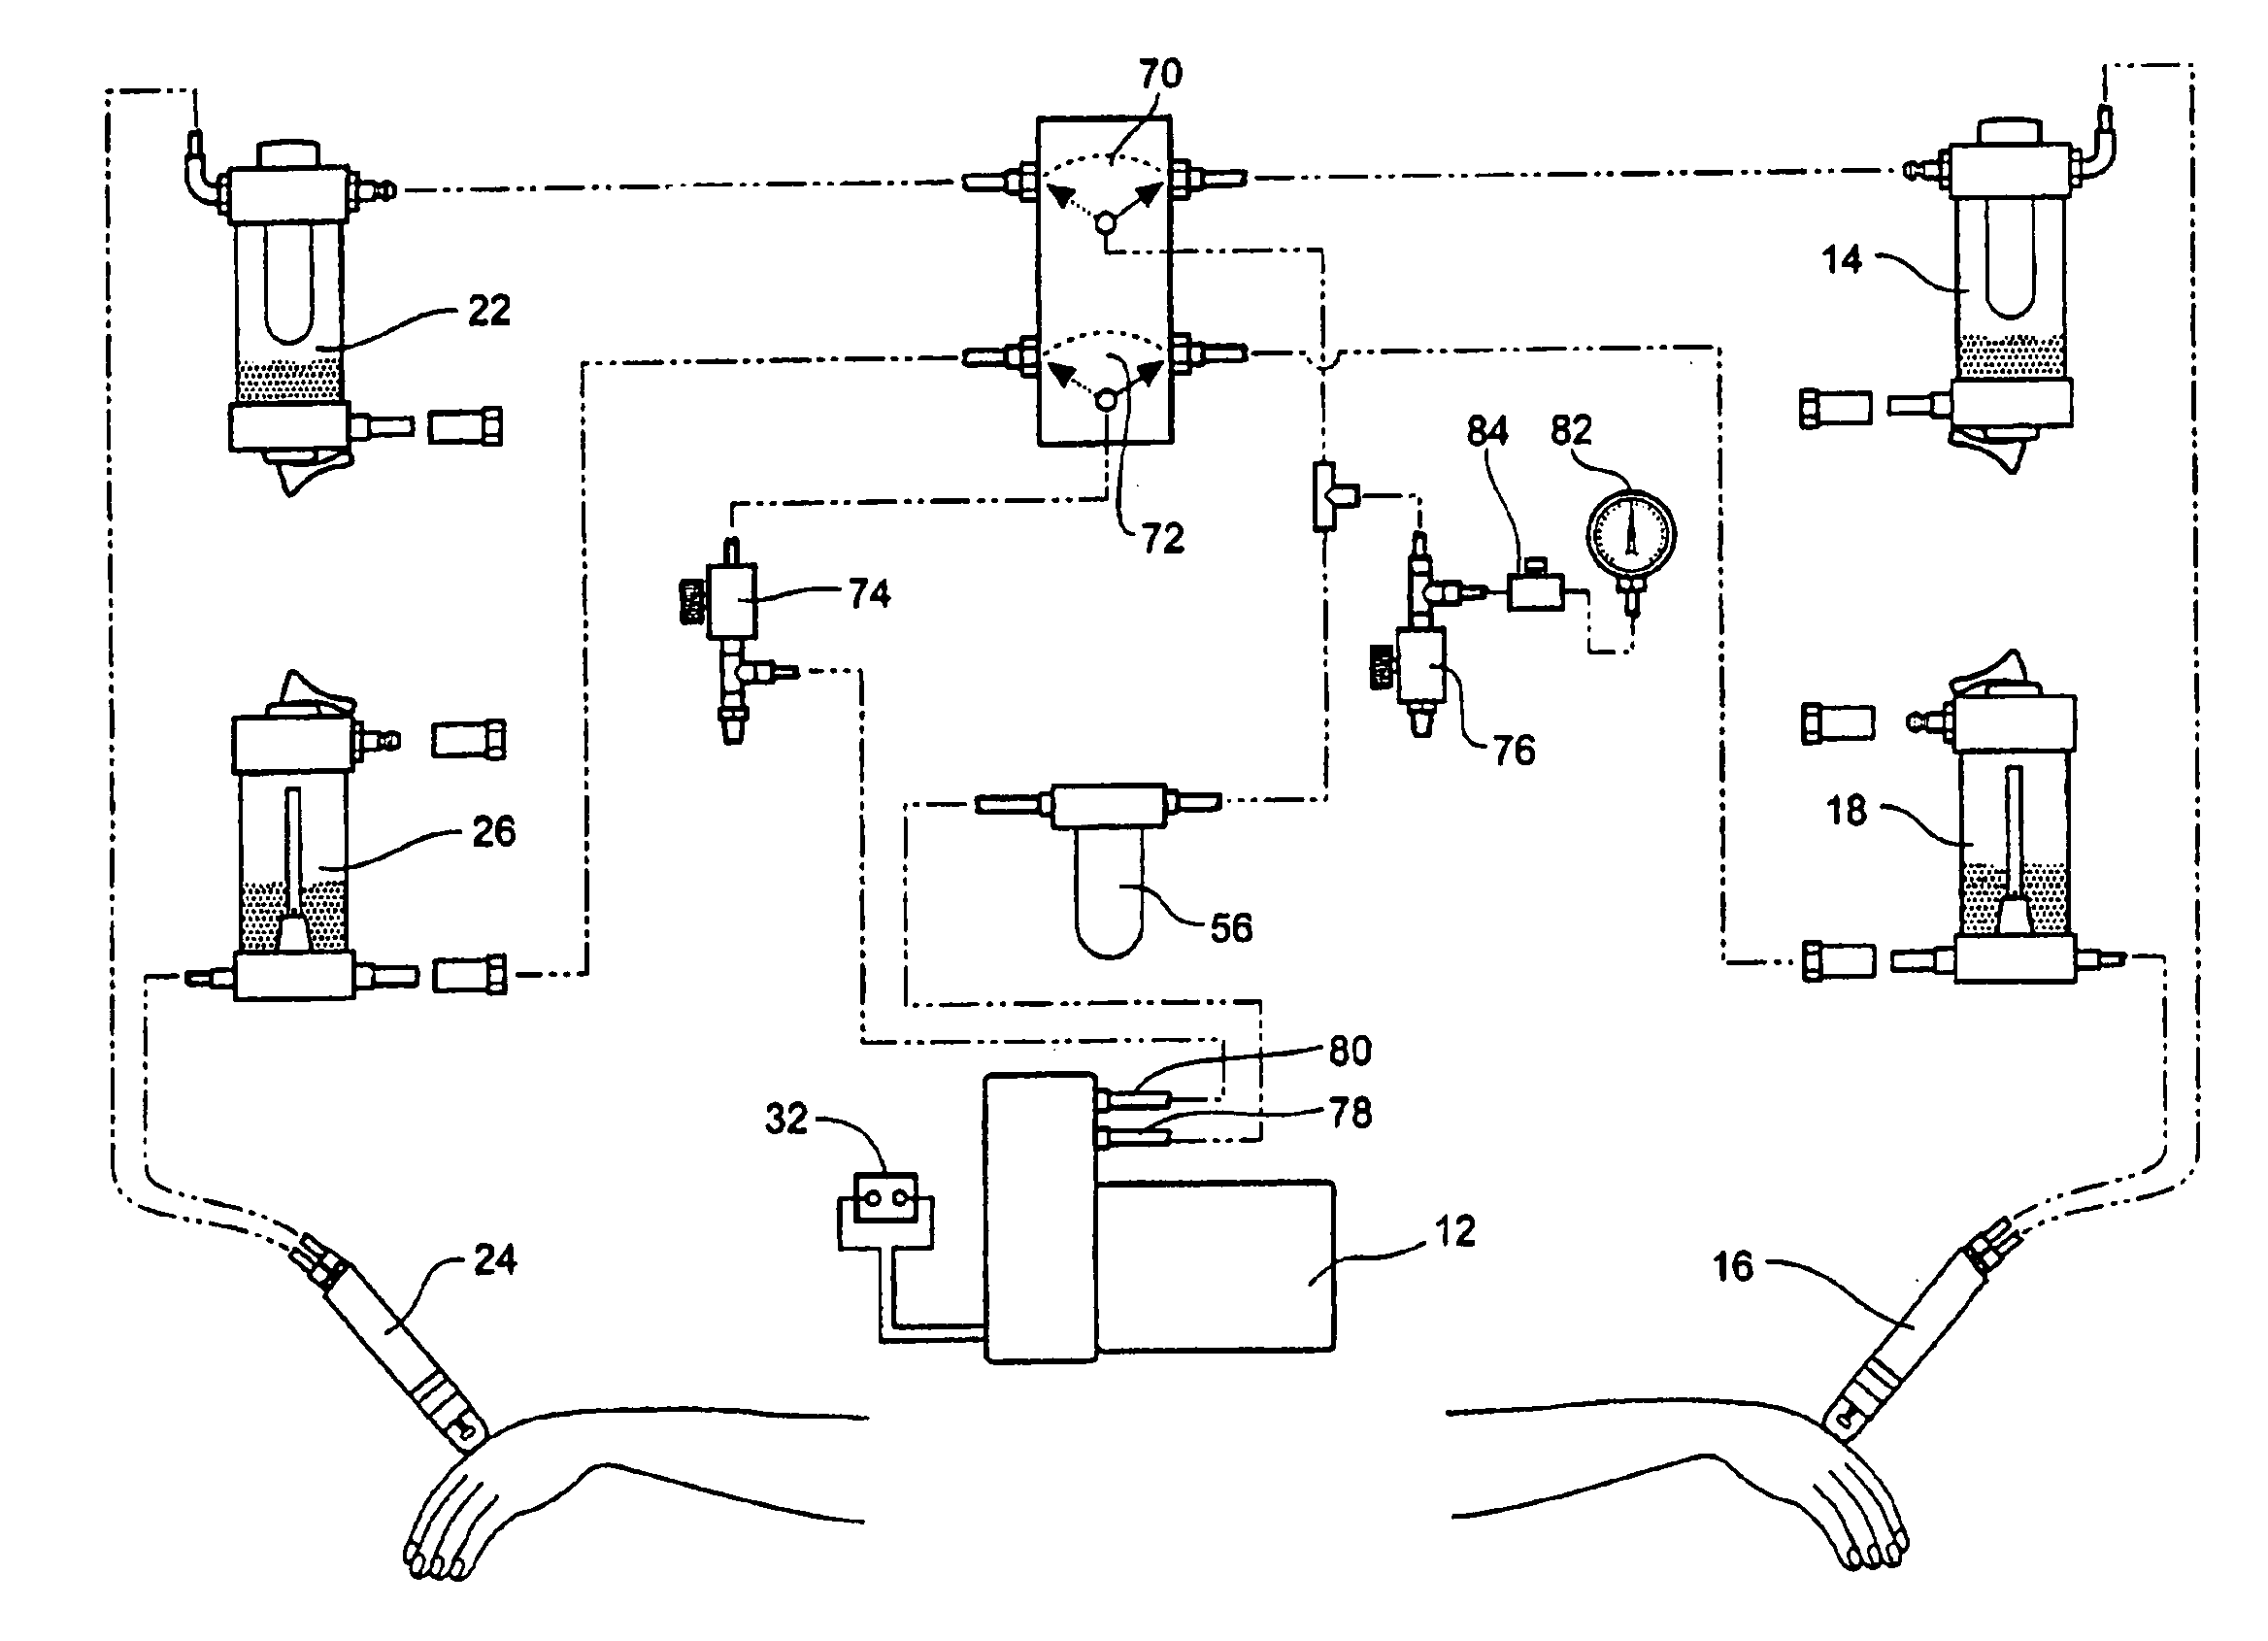 Apparatus for variable micro abrasion of human tissue and/or hides using different size and types of abrasive particles